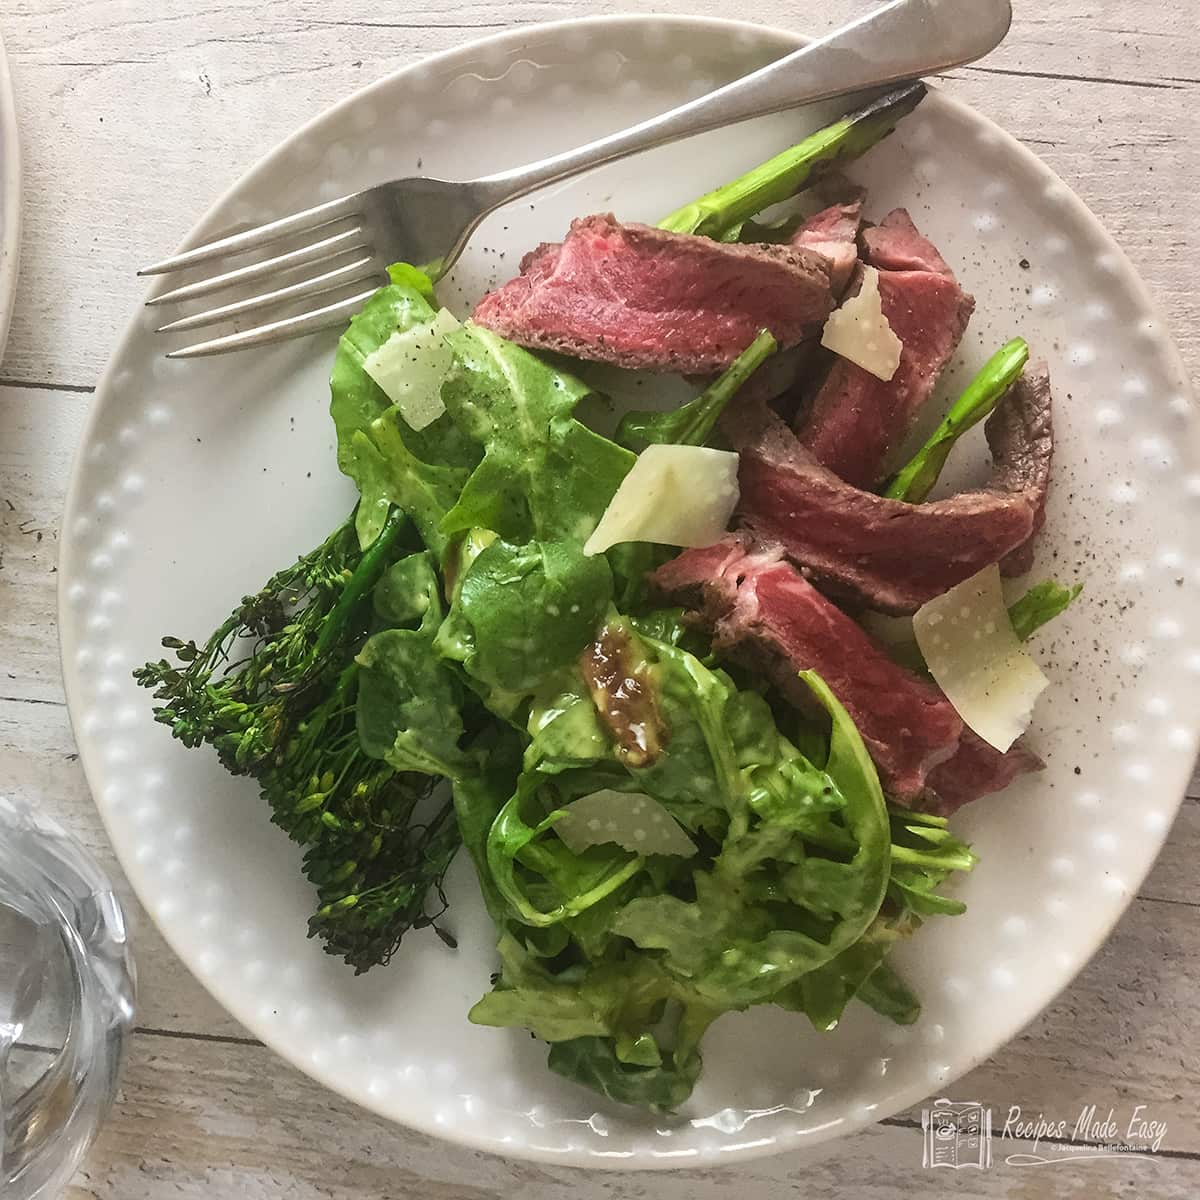 chargrilled broccoli rocket and beef salad on dinner plate with glasses behind. dress